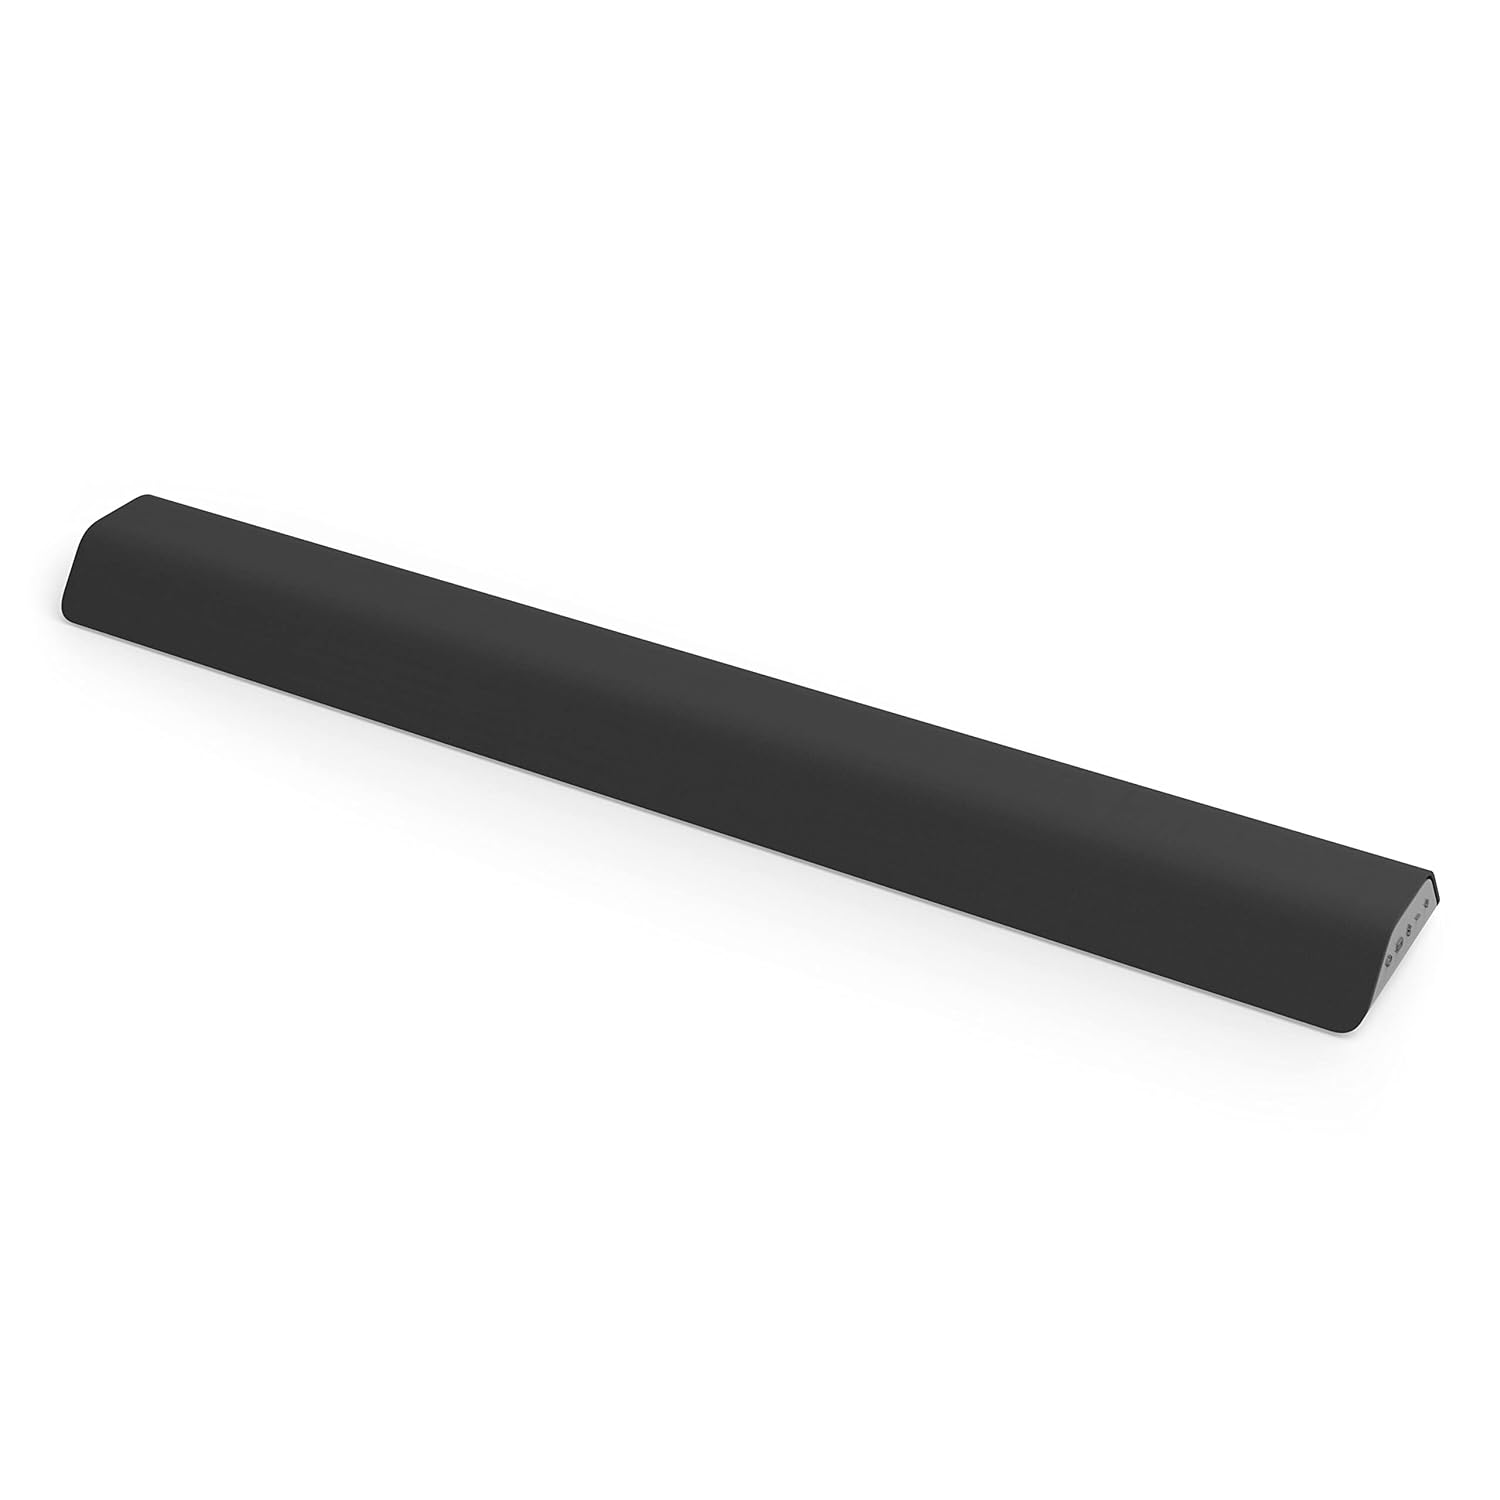 VIZIO M-Series All-in-One 2.1 Immersive Sound Bar with 6 High-Performance Speakers, Dolby Atmos, DTS:X, Built in Subwoofers a…